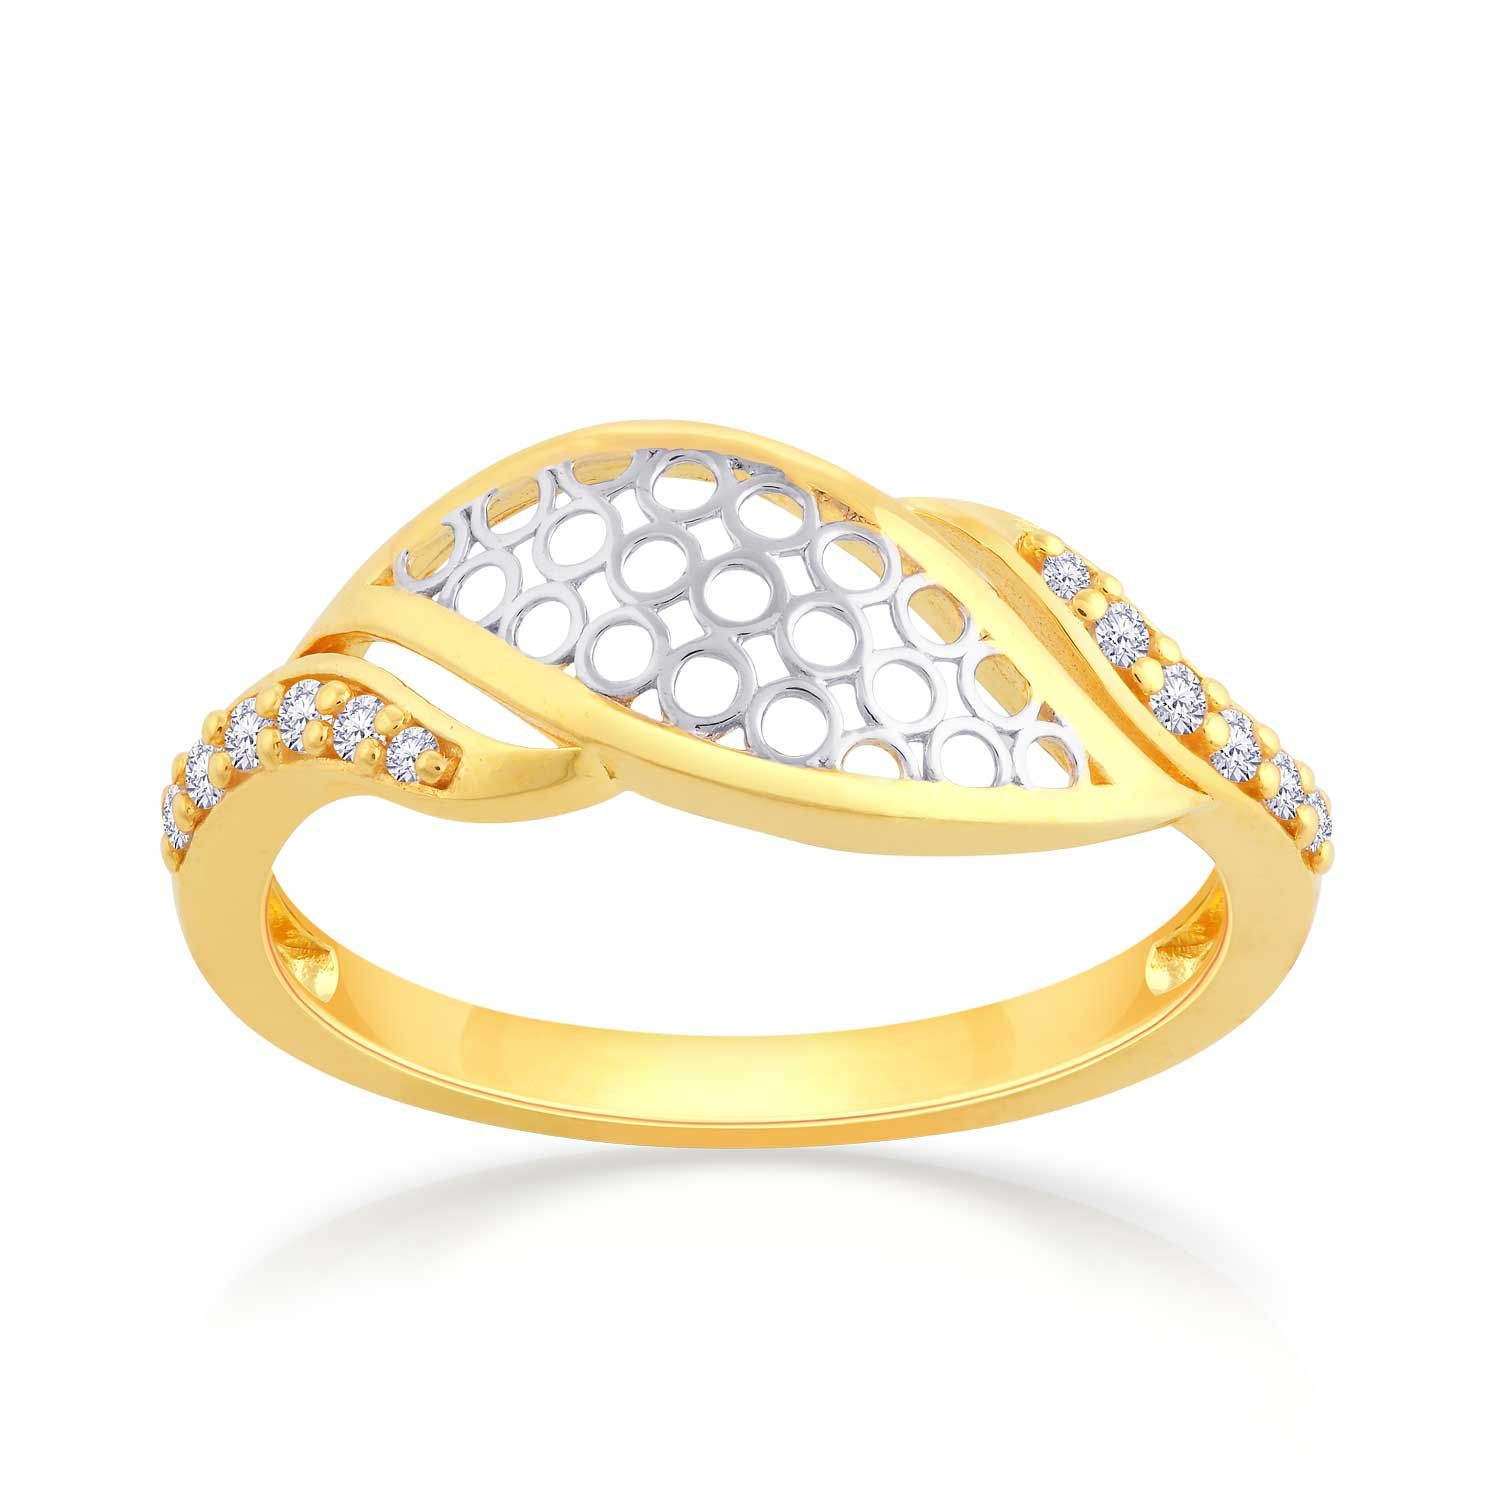 Buy Malabar Gold 22 KT Gold Band Ring for Women Online